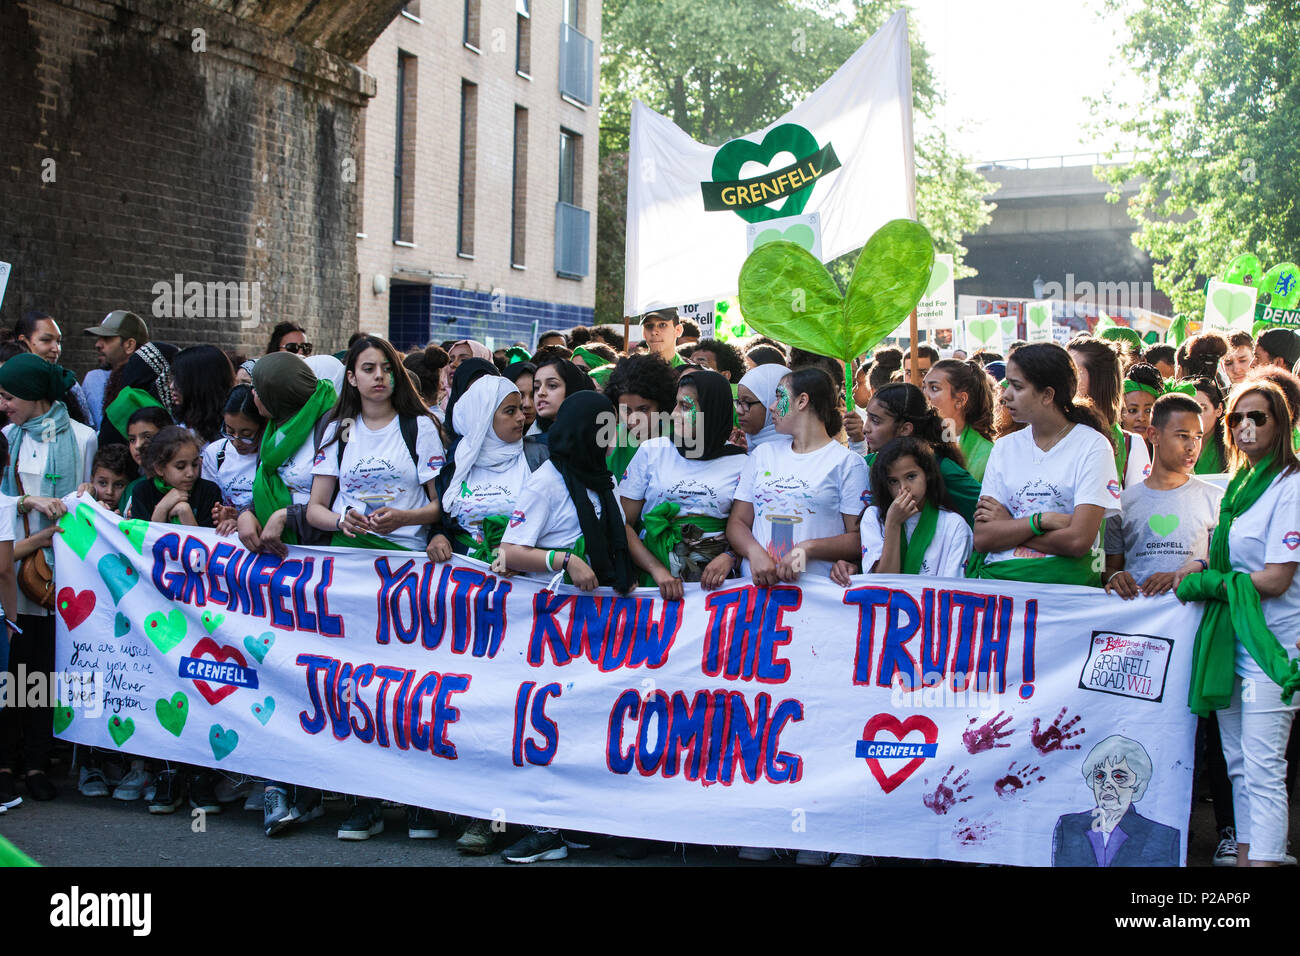 London, UK. 14th June, 2018. Members of the Grenfell community and supporters take part in the Grenfell Silent March through West Kensington on the first anniversary of the Grenfell Tower fire. 72 people died in the Grenfell Tower fire and over 70 were injured. Credit: Mark Kerrison/Alamy Live News Stock Photo